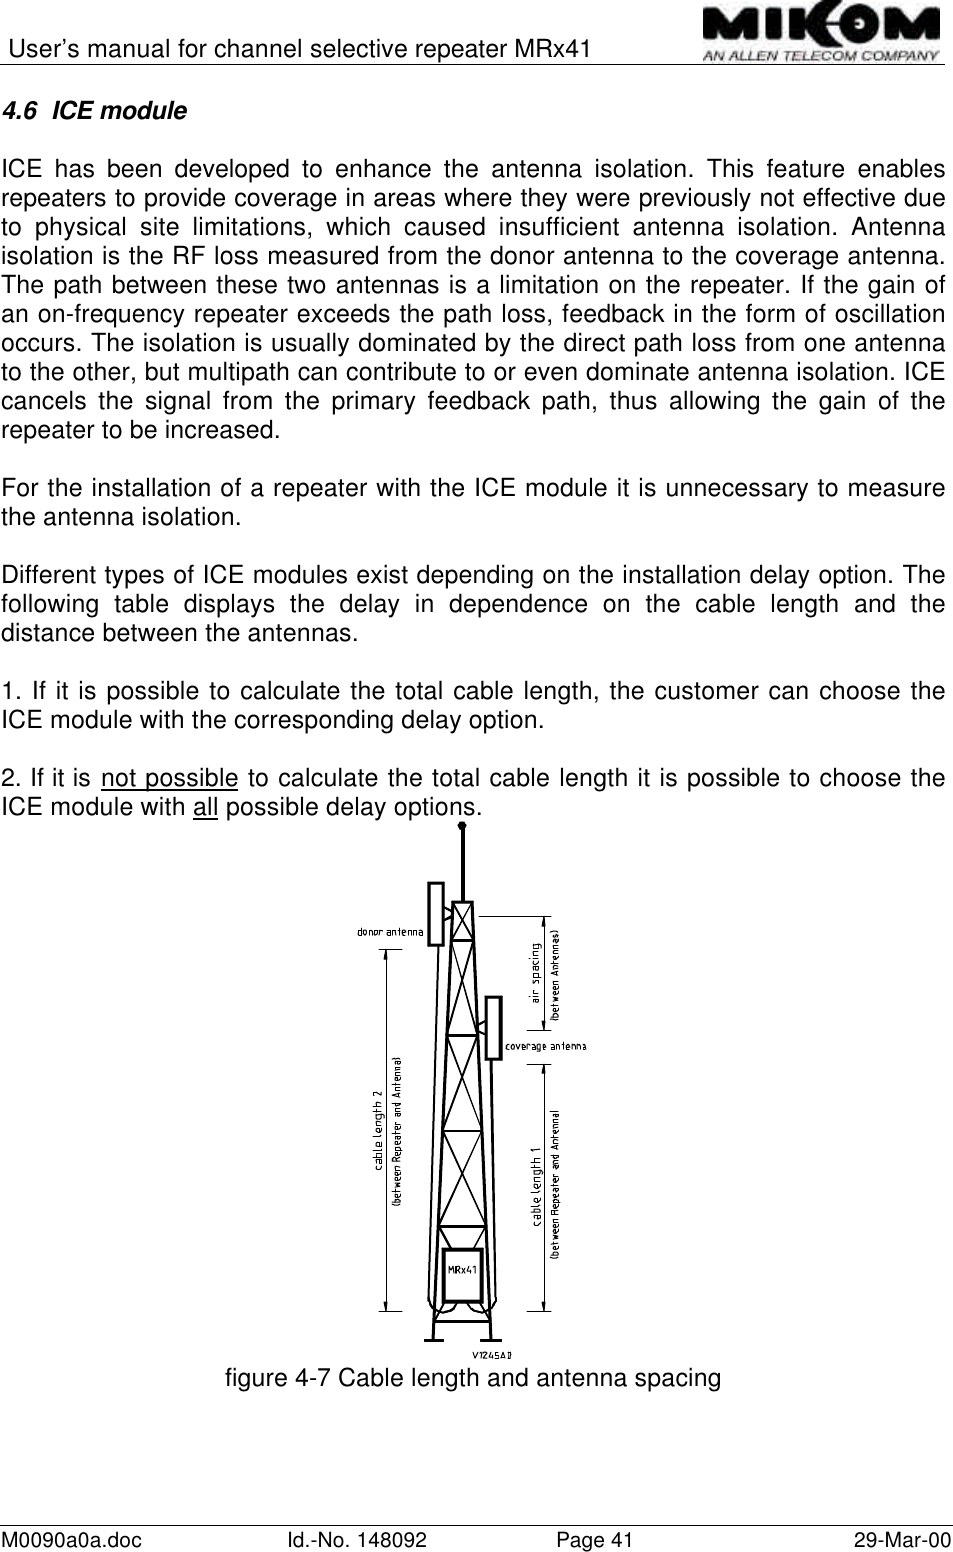 User’s manual for channel selective repeater MRx41M0090a0a.doc Id.-No. 148092 Page 41 29-Mar-004.6 ICE moduleICE has been developed to enhance the antenna isolation. This feature enablesrepeaters to provide coverage in areas where they were previously not effective dueto physical site limitations, which caused insufficient antenna isolation. Antennaisolation is the RF loss measured from the donor antenna to the coverage antenna.The path between these two antennas is a limitation on the repeater. If the gain ofan on-frequency repeater exceeds the path loss, feedback in the form of oscillationoccurs. The isolation is usually dominated by the direct path loss from one antennato the other, but multipath can contribute to or even dominate antenna isolation. ICEcancels the signal from the primary feedback path, thus allowing the gain of therepeater to be increased.For the installation of a repeater with the ICE module it is unnecessary to measurethe antenna isolation.Different types of ICE modules exist depending on the installation delay option. Thefollowing table displays the delay in dependence on the cable length and thedistance between the antennas.1. If it is possible to calculate the total cable length, the customer can choose theICE module with the corresponding delay option.2. If it is not possible to calculate the total cable length it is possible to choose theICE module with all possible delay options.figure 4-7 Cable length and antenna spacing